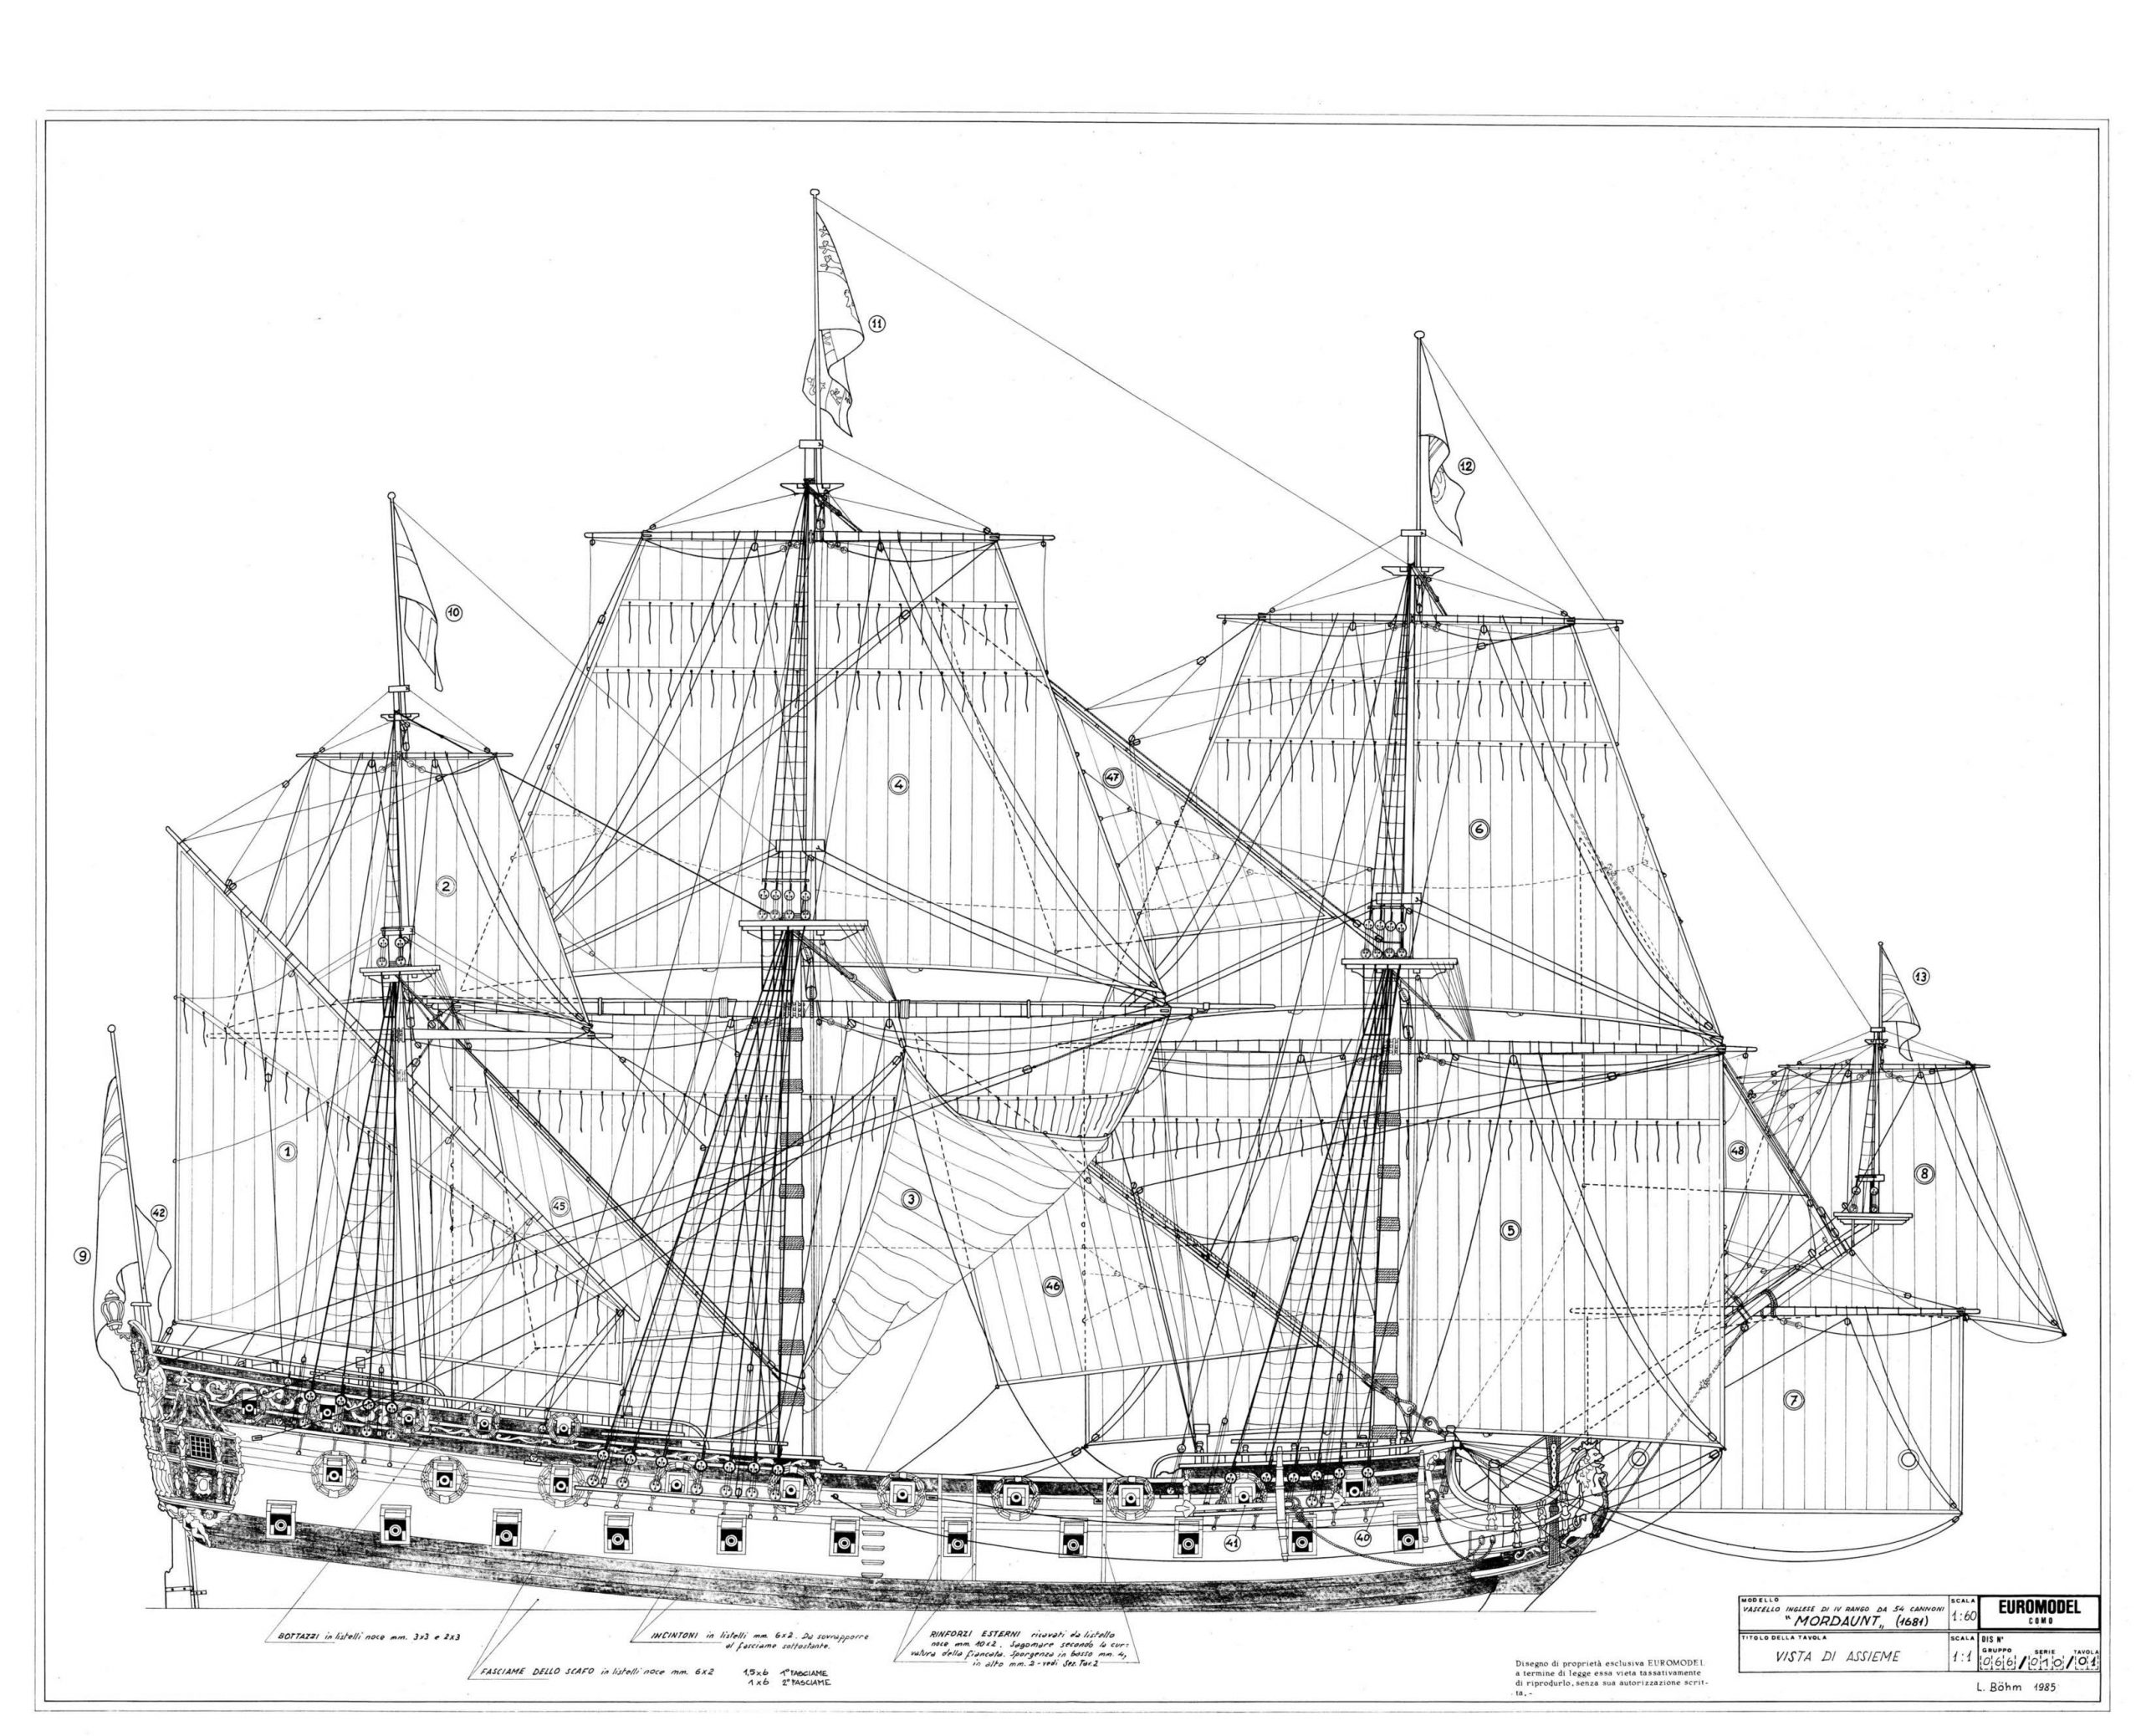 Plan of a 4th rate ship of the line